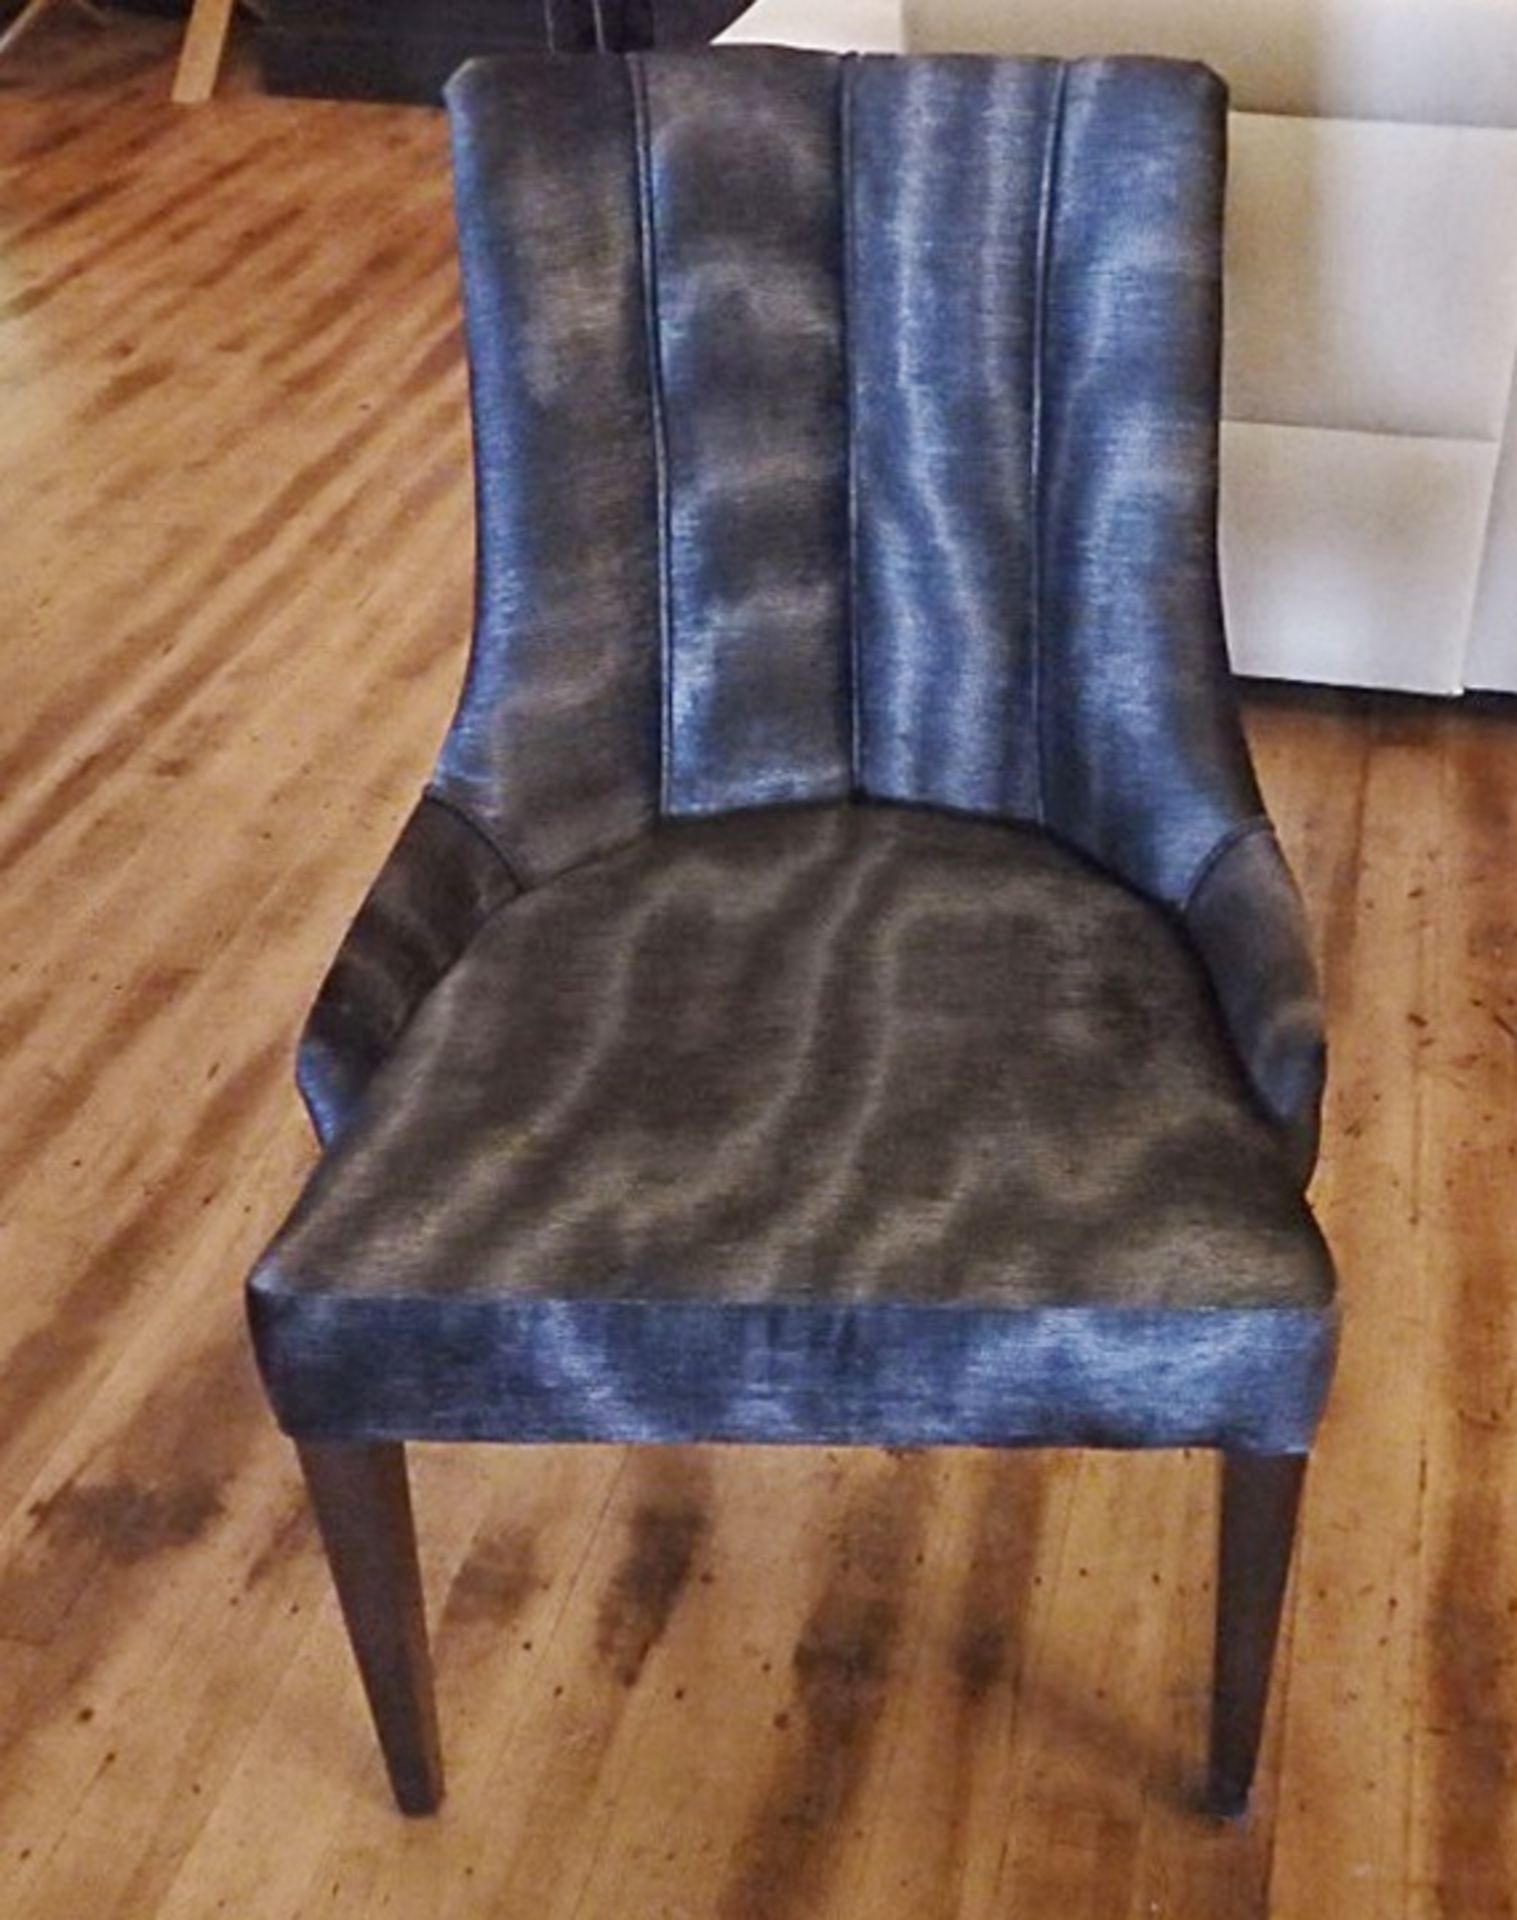 1 x Bespoke Handcrafted Button Back Chair - In A Rich "Zinc Jacopo" Fabric - Dimensions: Approx